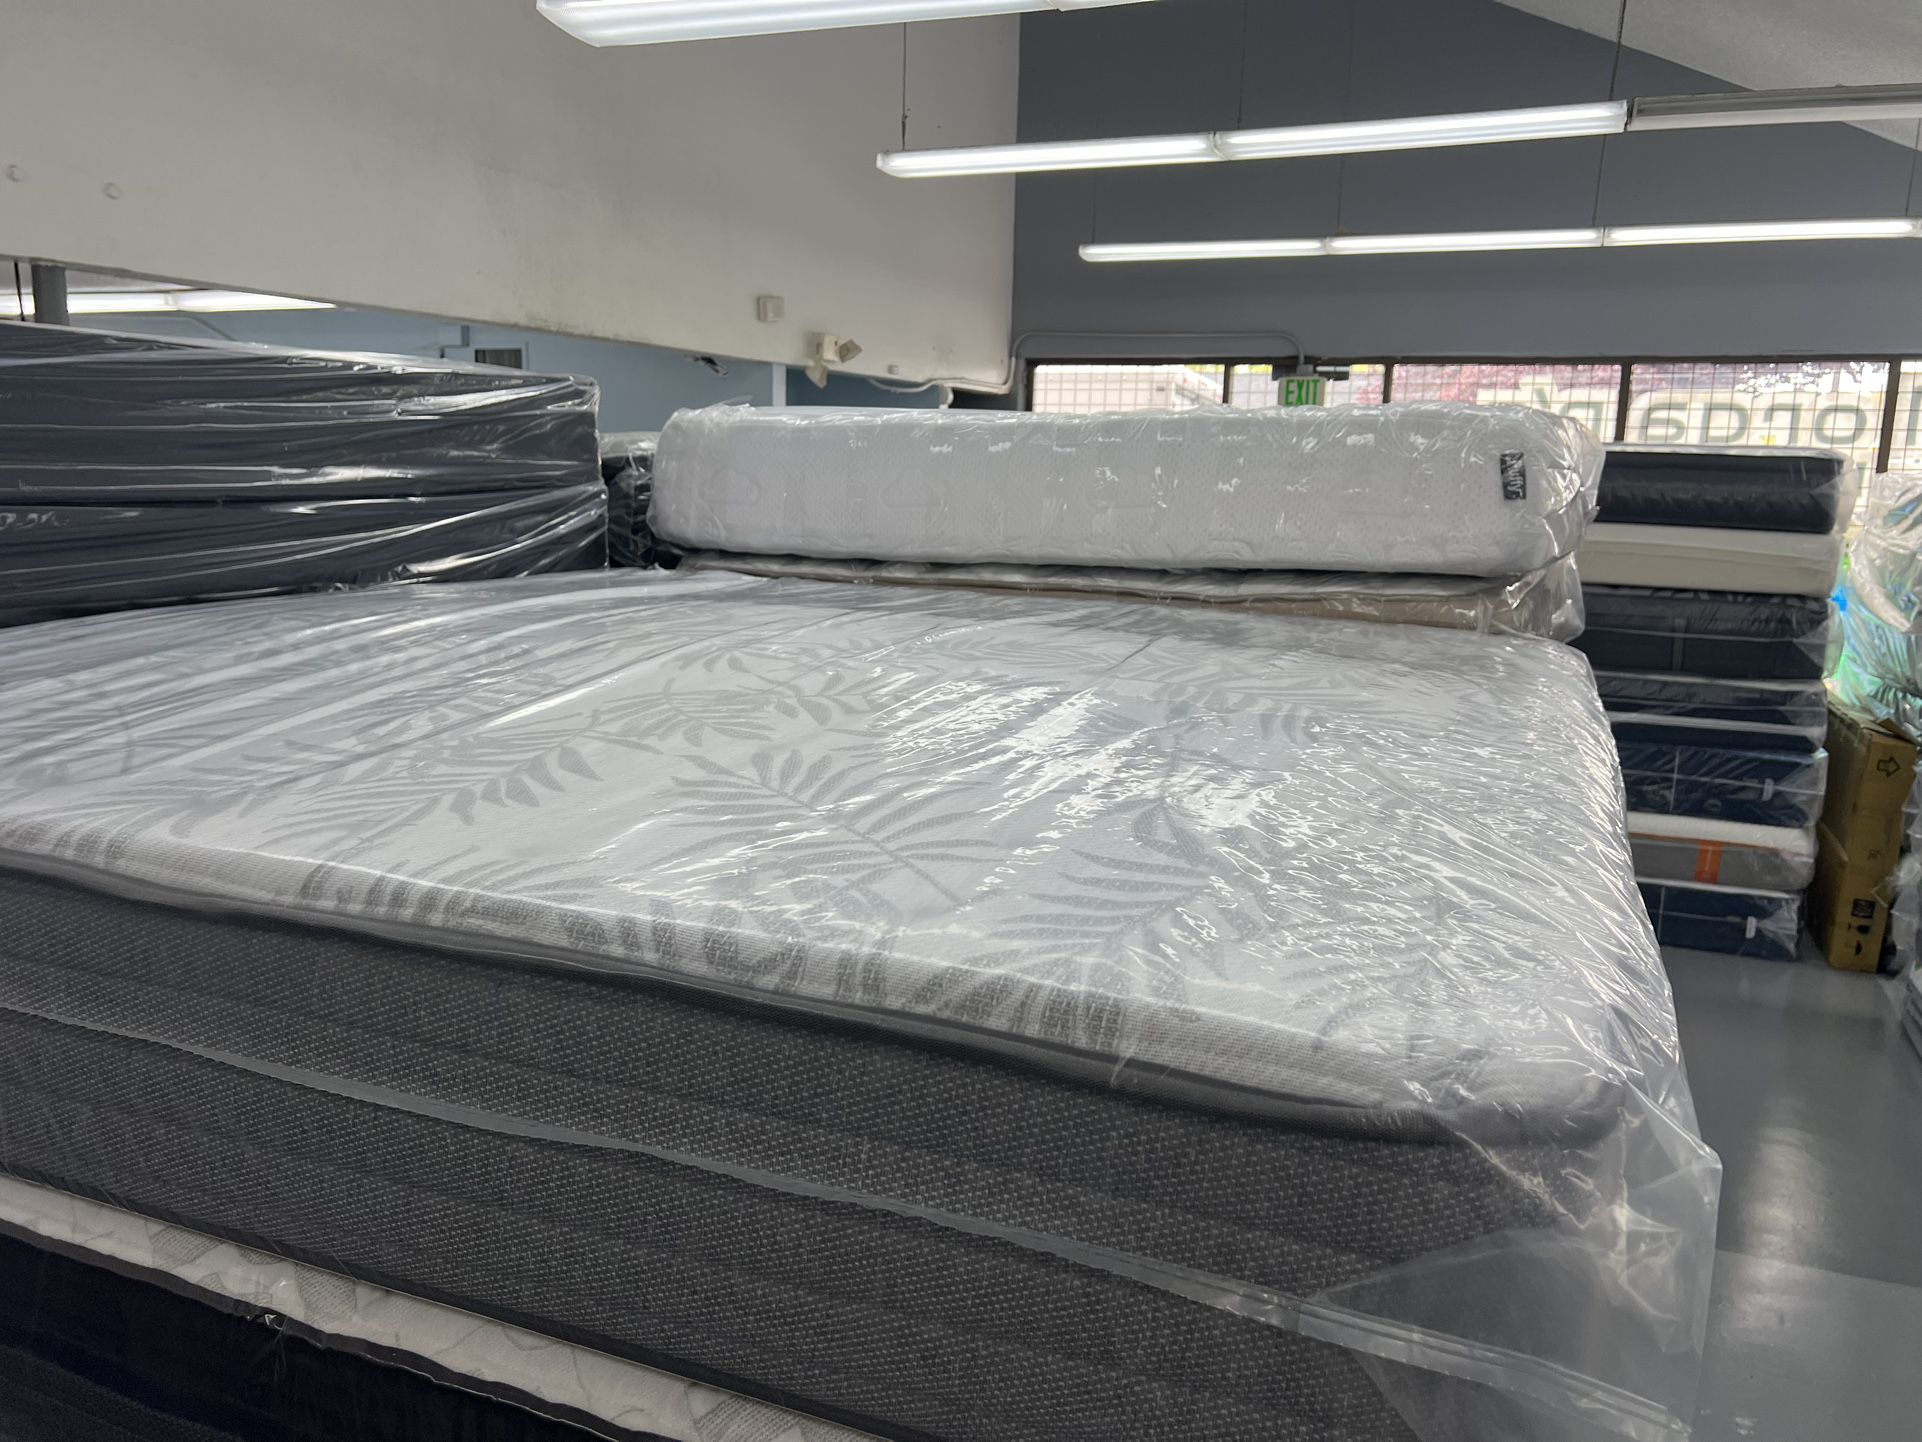 KING SIZE SEALY POSTUREPEDIC (FIRM) MATTRESS & BOX SPRINGS BED SET